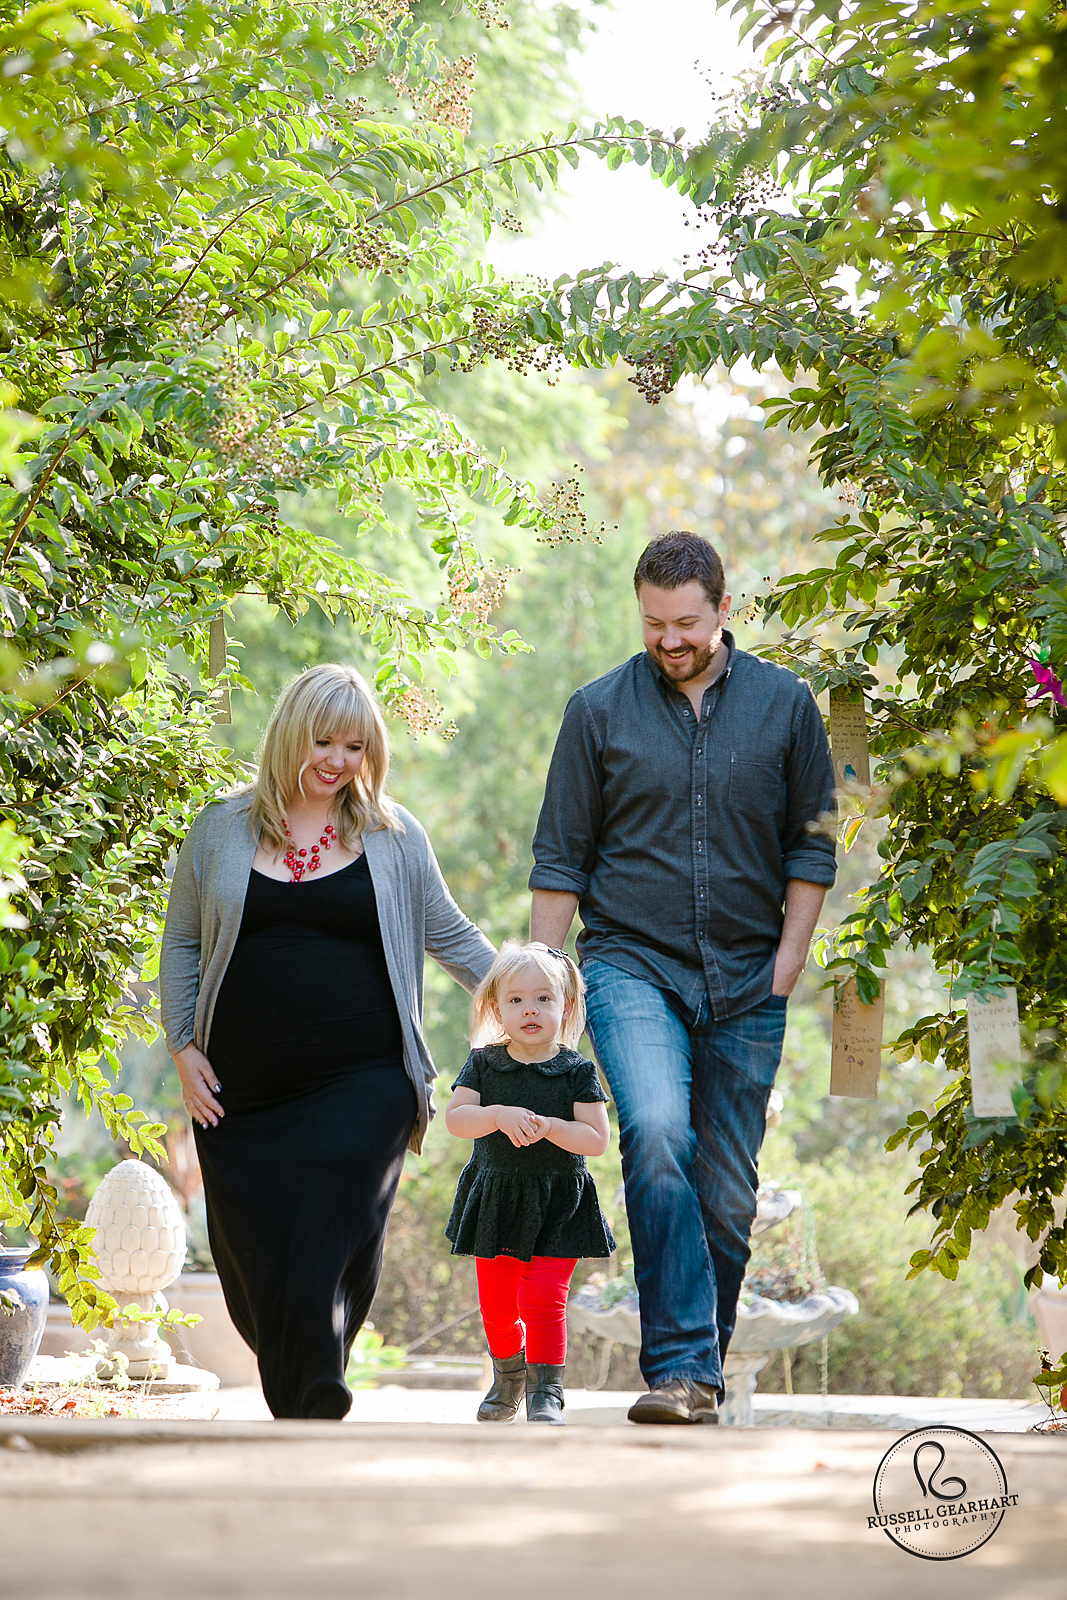 Pasadena Family Portraits: Goyette Family – Russell Gearhart Photography – www.gearhartphoto.com